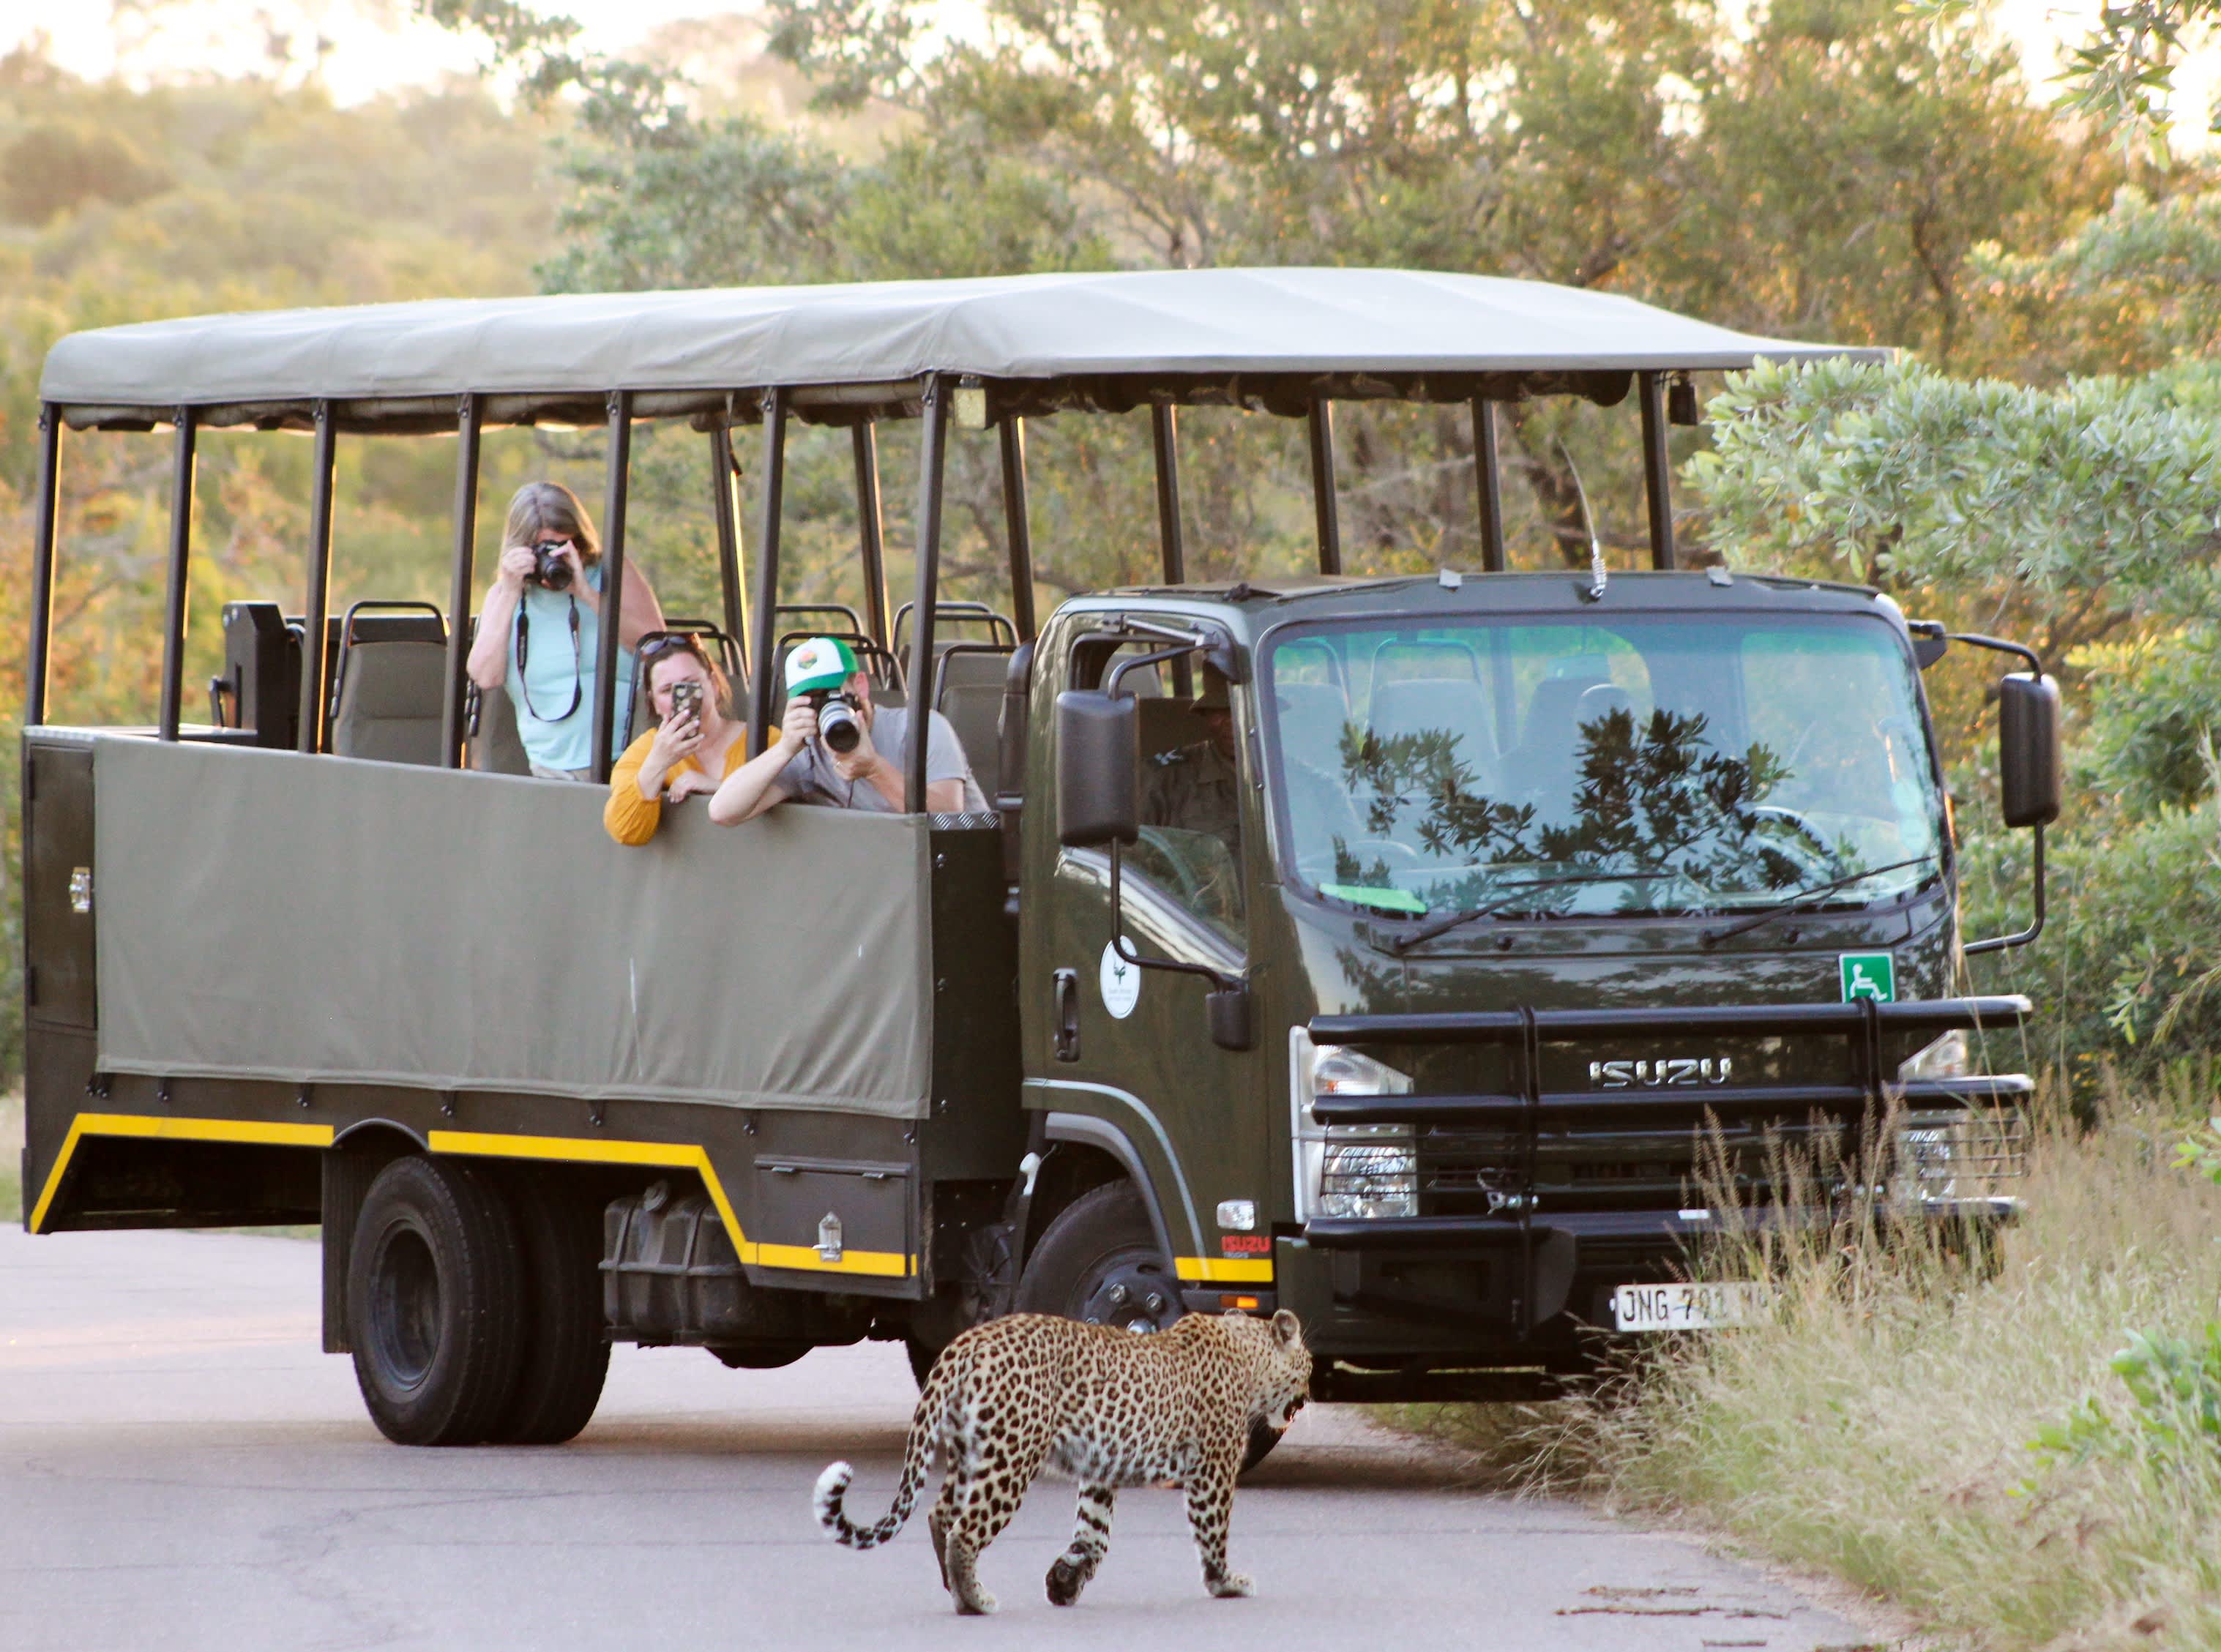 Skukuza Safari Lodge: KRUGER NATIONAL PARK- 1 Night stay for 2 Adults + Breakfast From R1 875 per person per night!